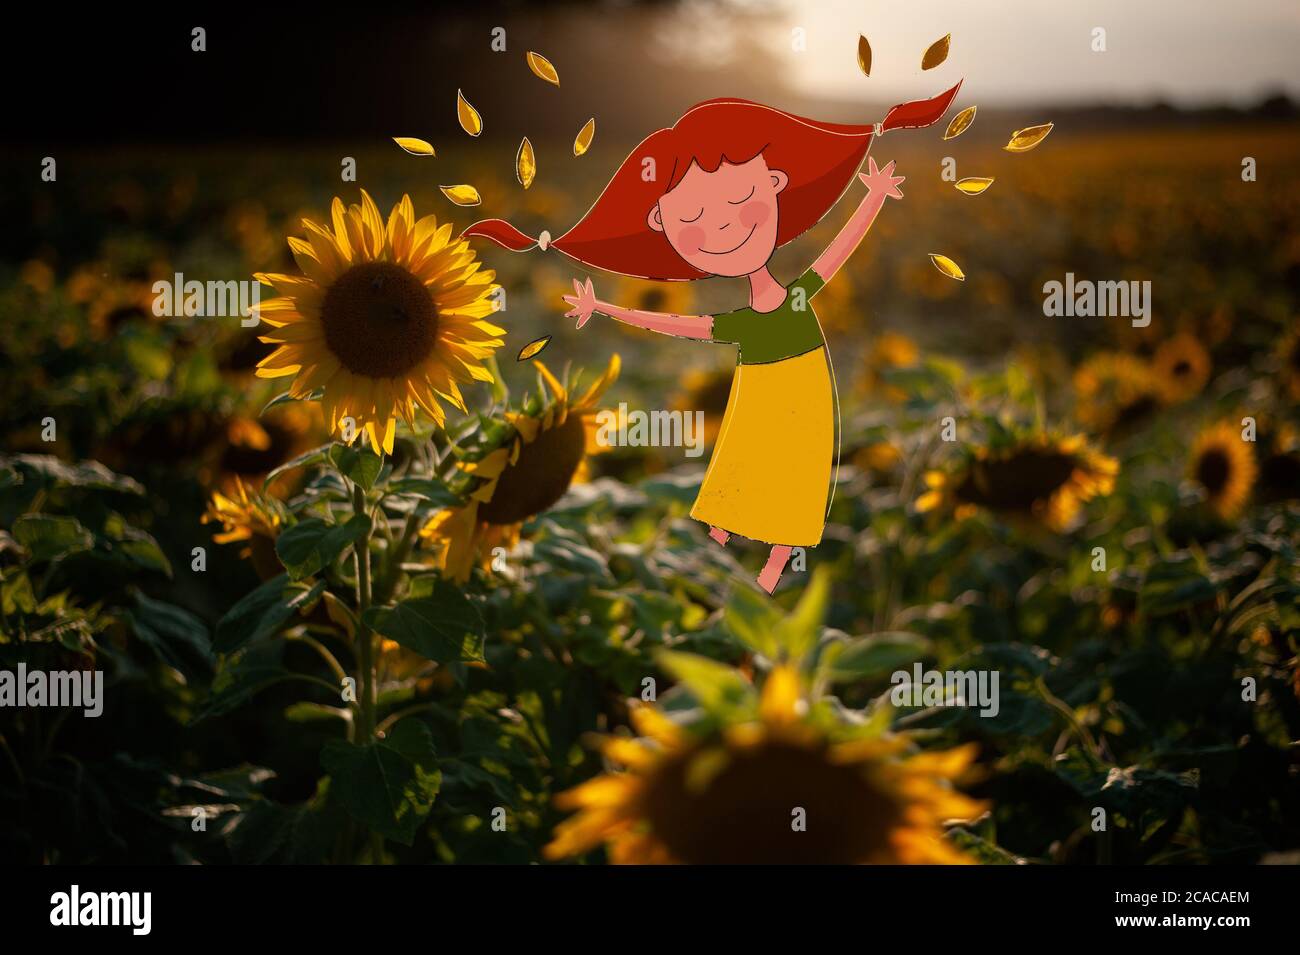 Cute redhead girl happy playing in sunflower field during sunset. Stock Photo